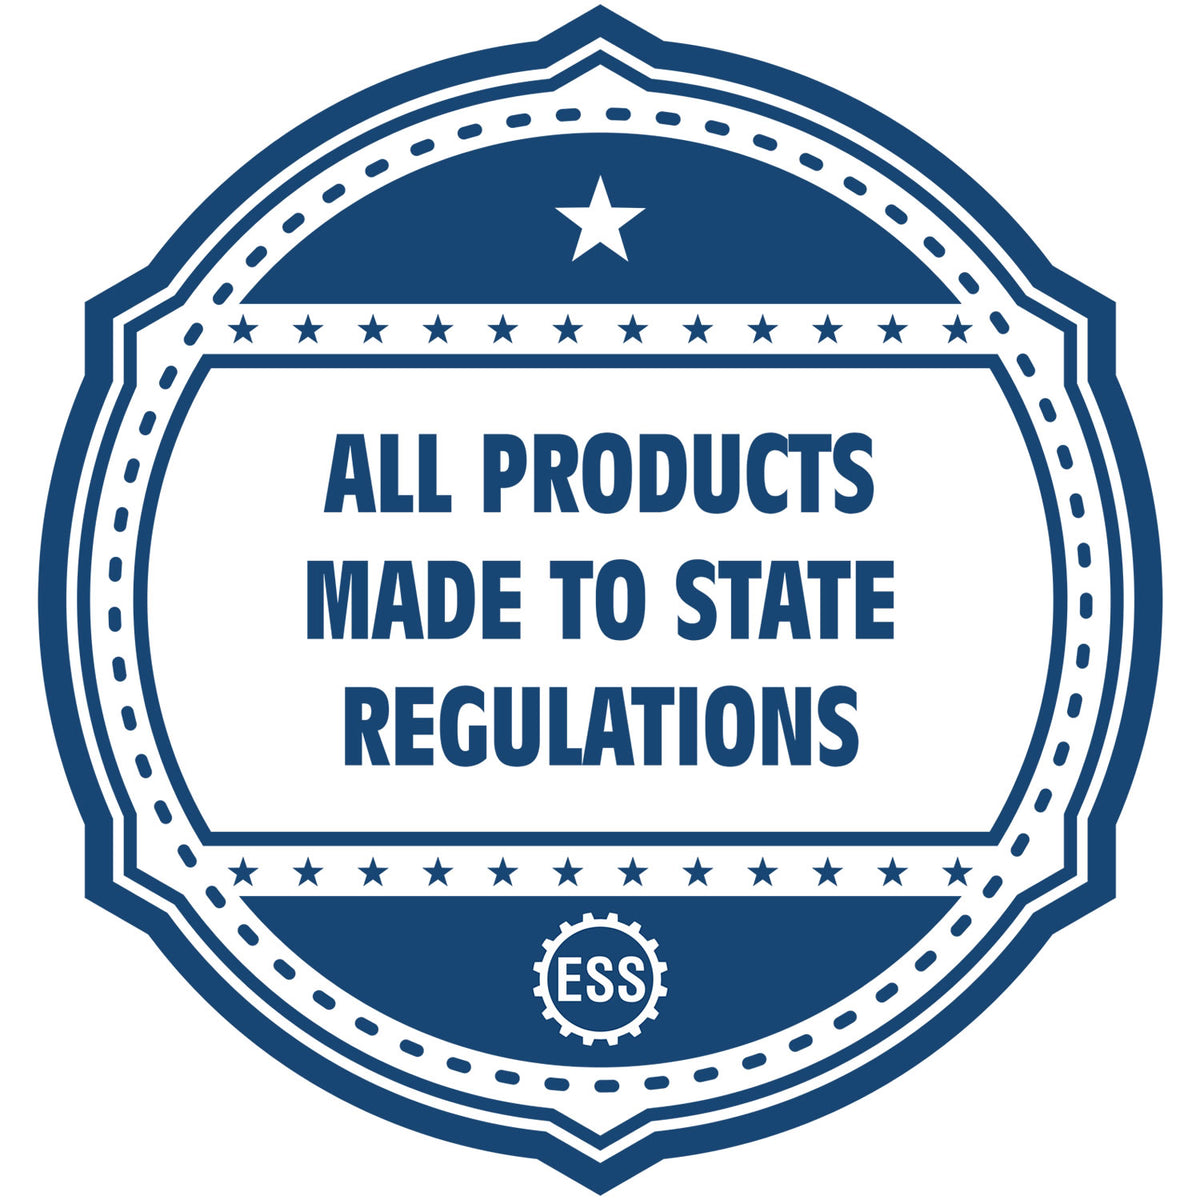 An icon or badge element for the Long Reach Nebraska Land Surveyor Seal showing that this product is made in compliance with state regulations.